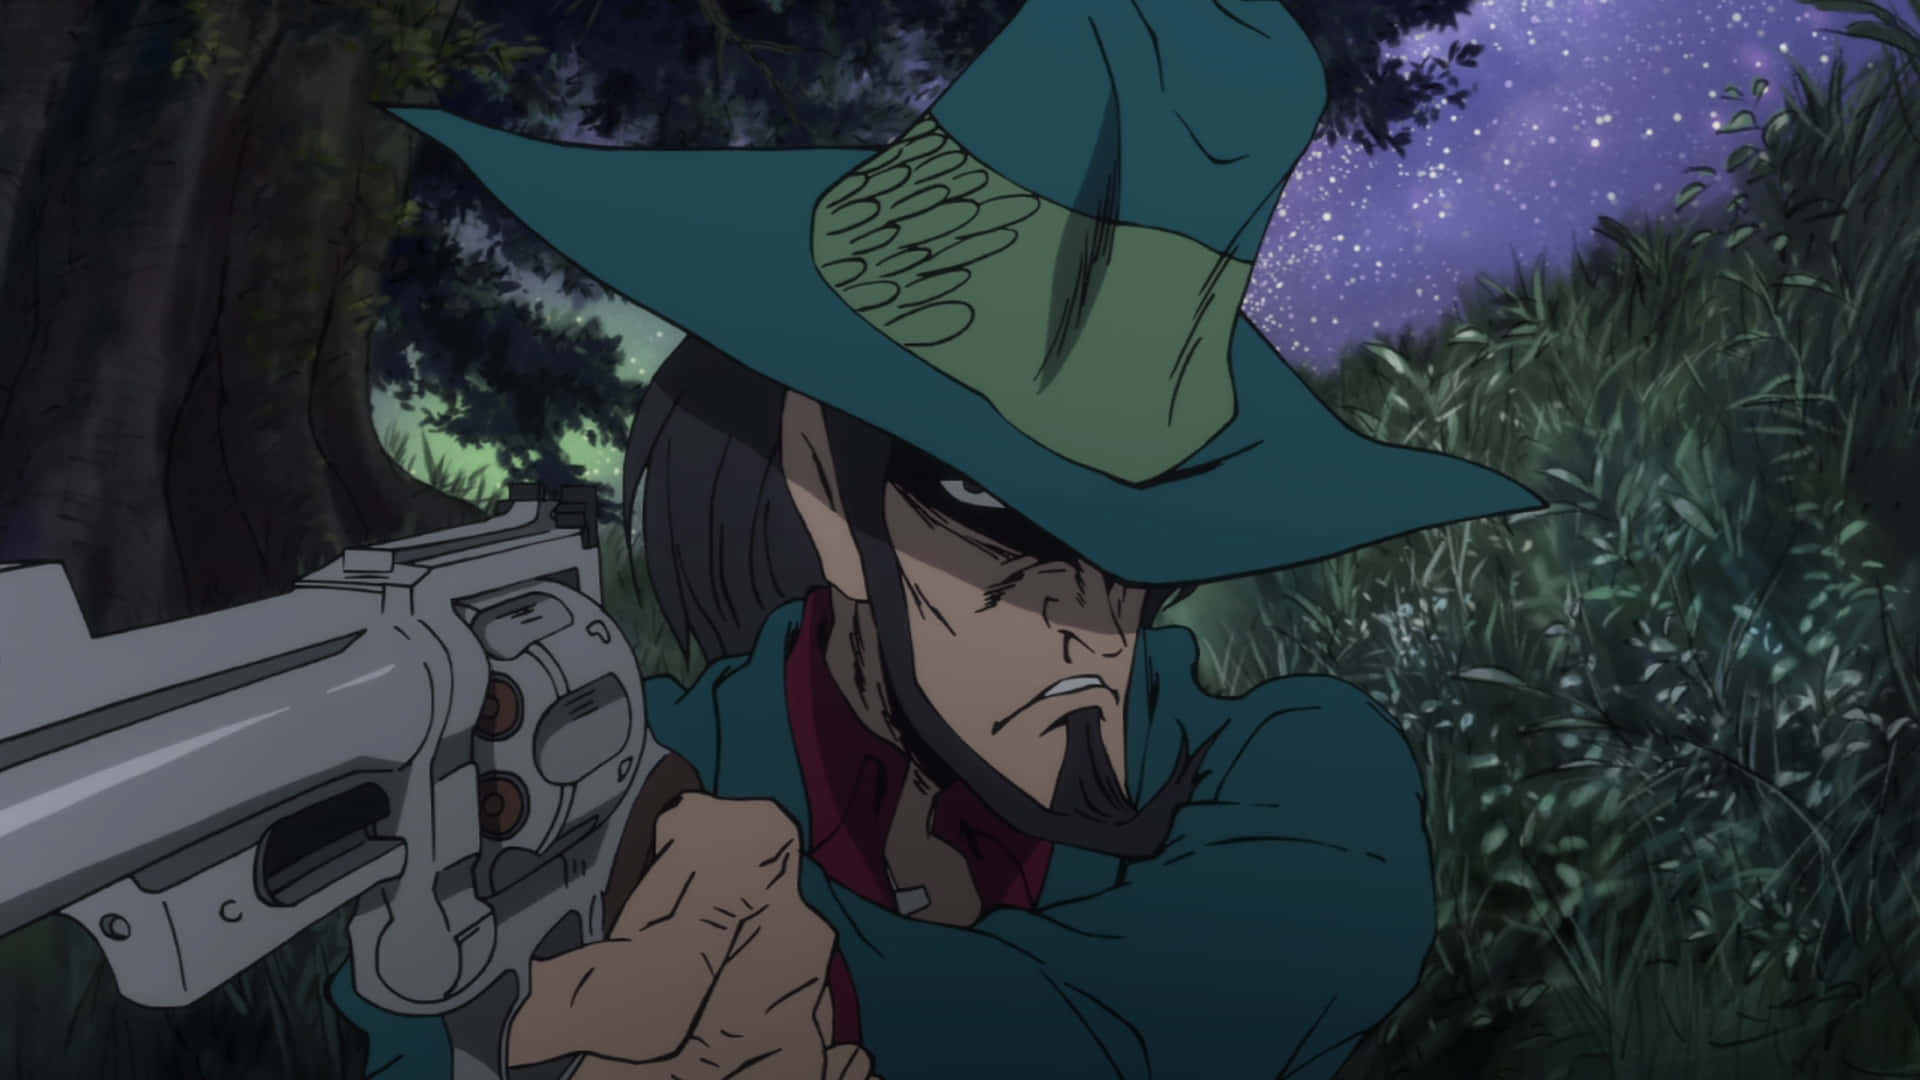 Daisuke Jigen strikes a pose with his signature hat and gun in anime series Lupin III. Wallpaper